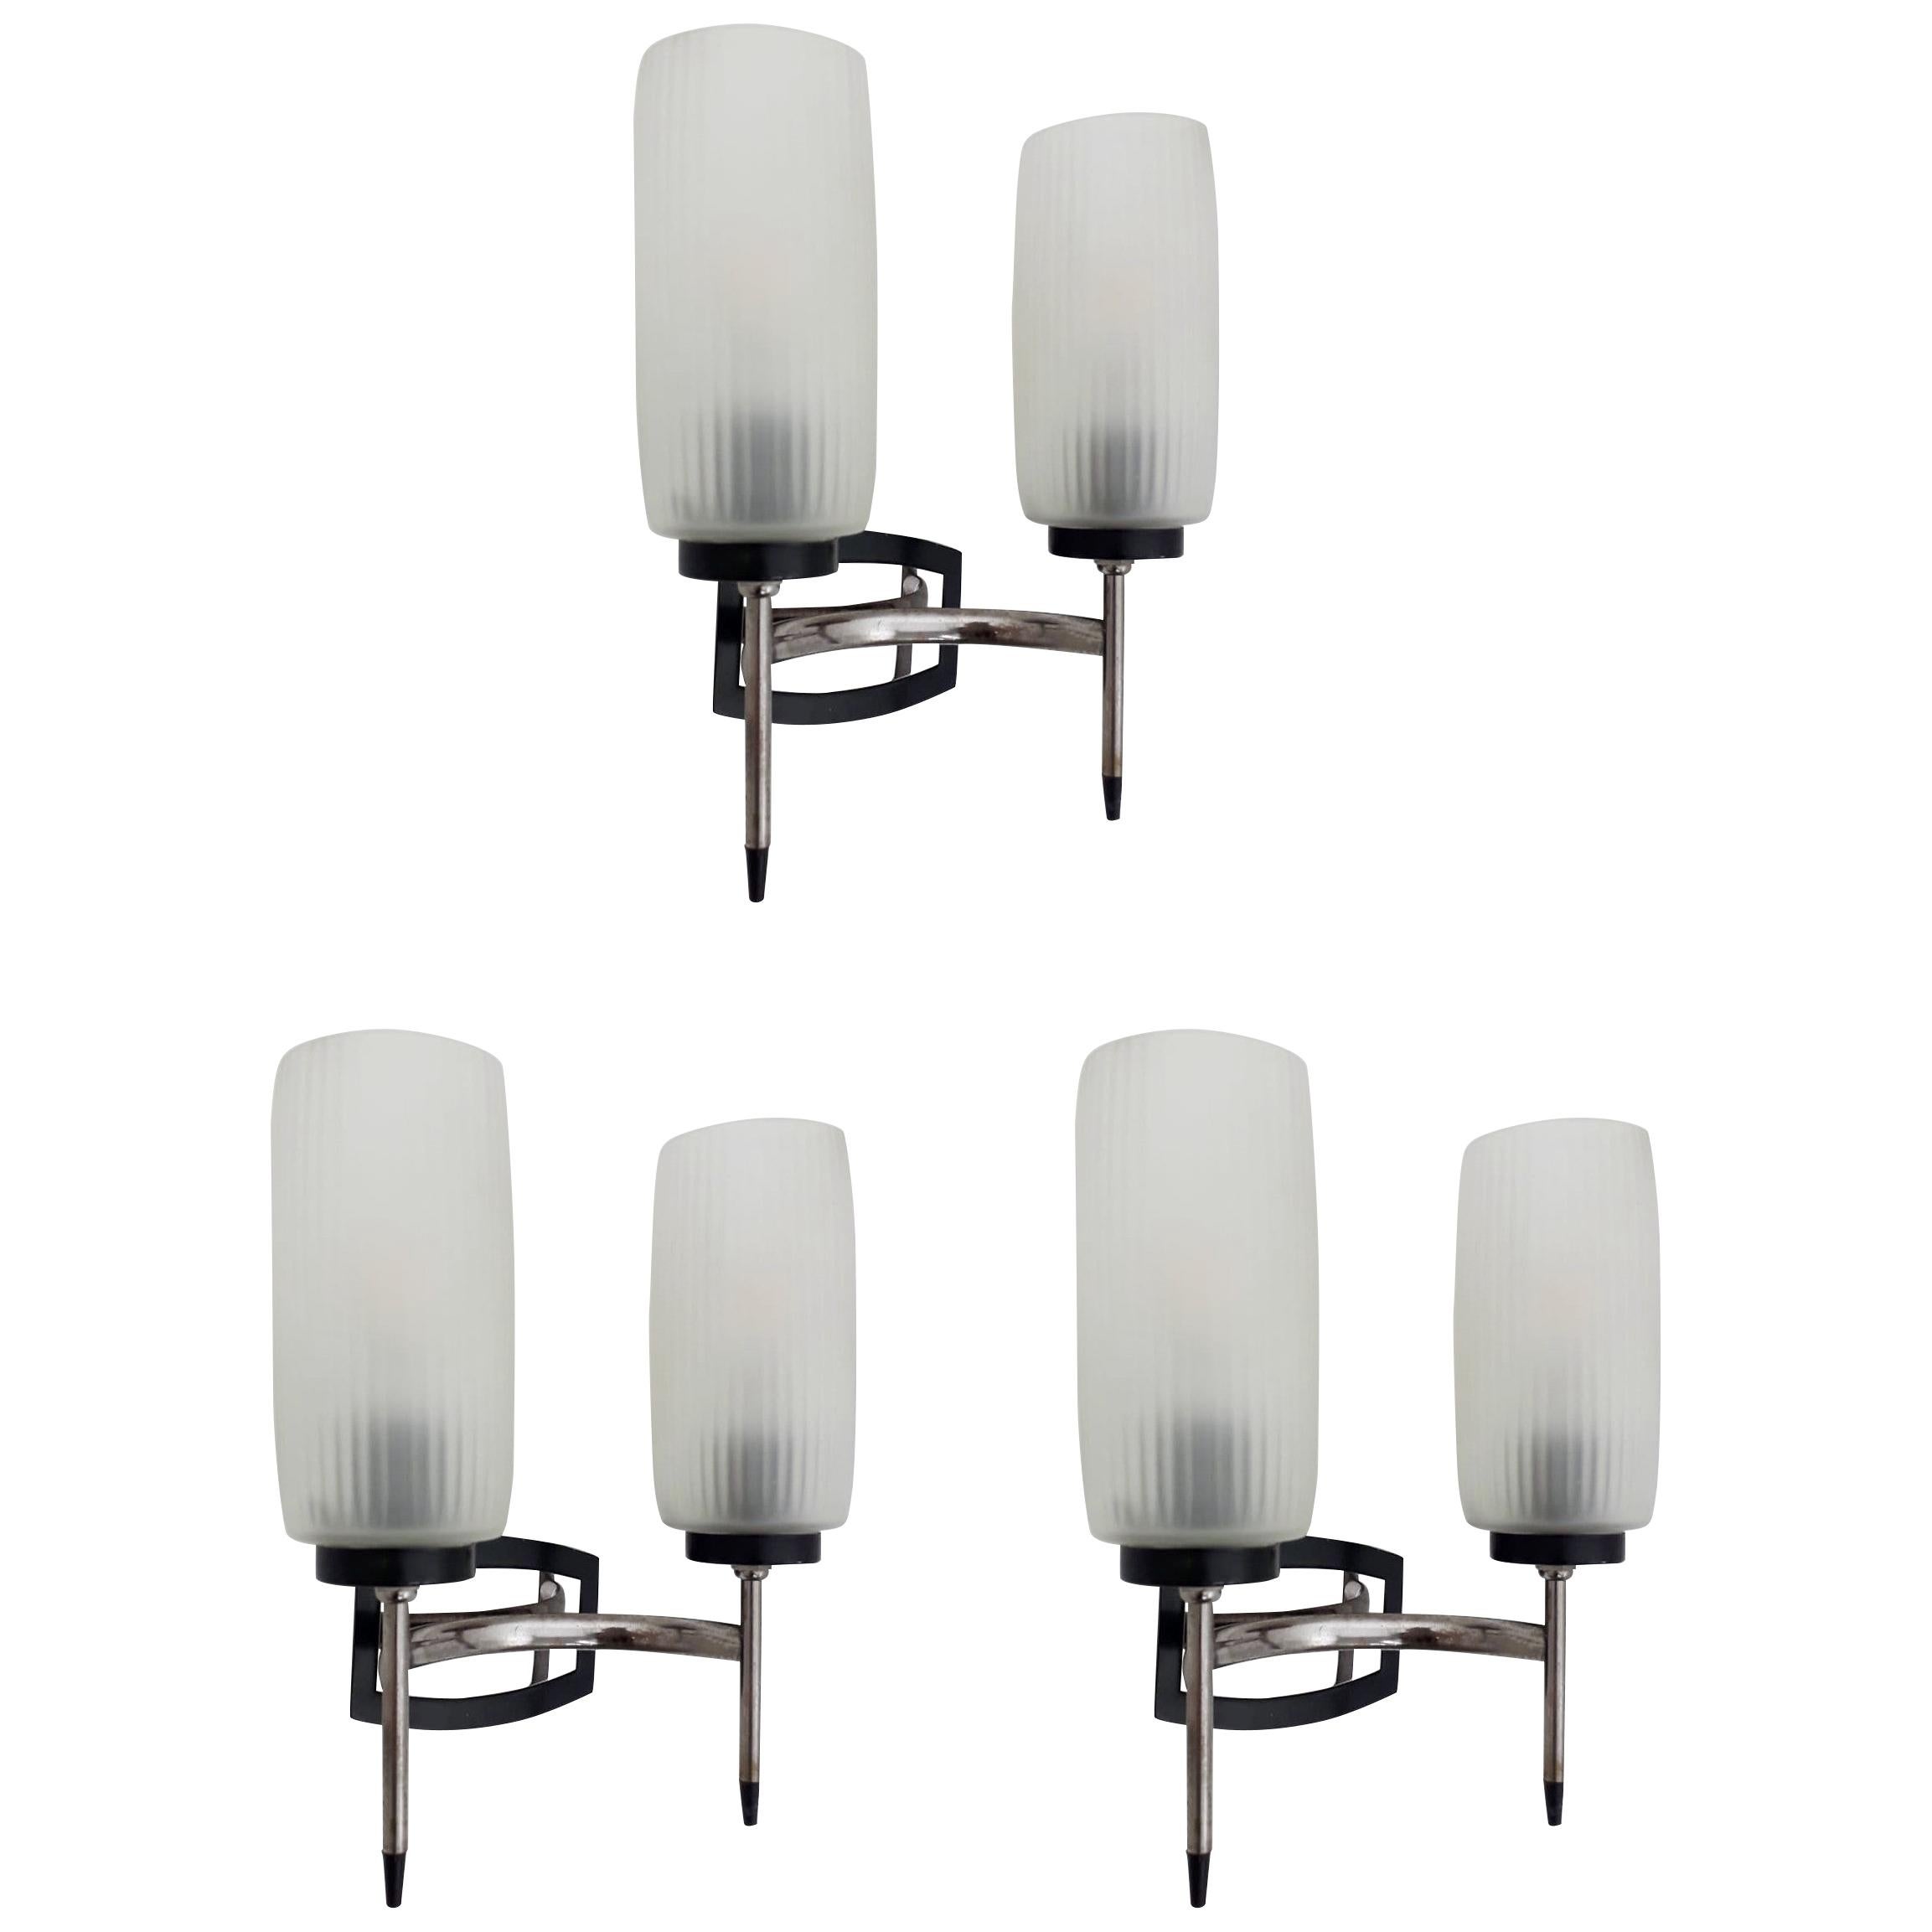 Vintage Italian wall light with frosted glass cone diffusers mounted on nickel and black frame / Made in Italy, circa 1970s
2 lights / E12 or E14 type / max 40W each
Height: 10 inches / Width: 8.5 inches / Depth: 4 inches
3 in stock in Italy, price